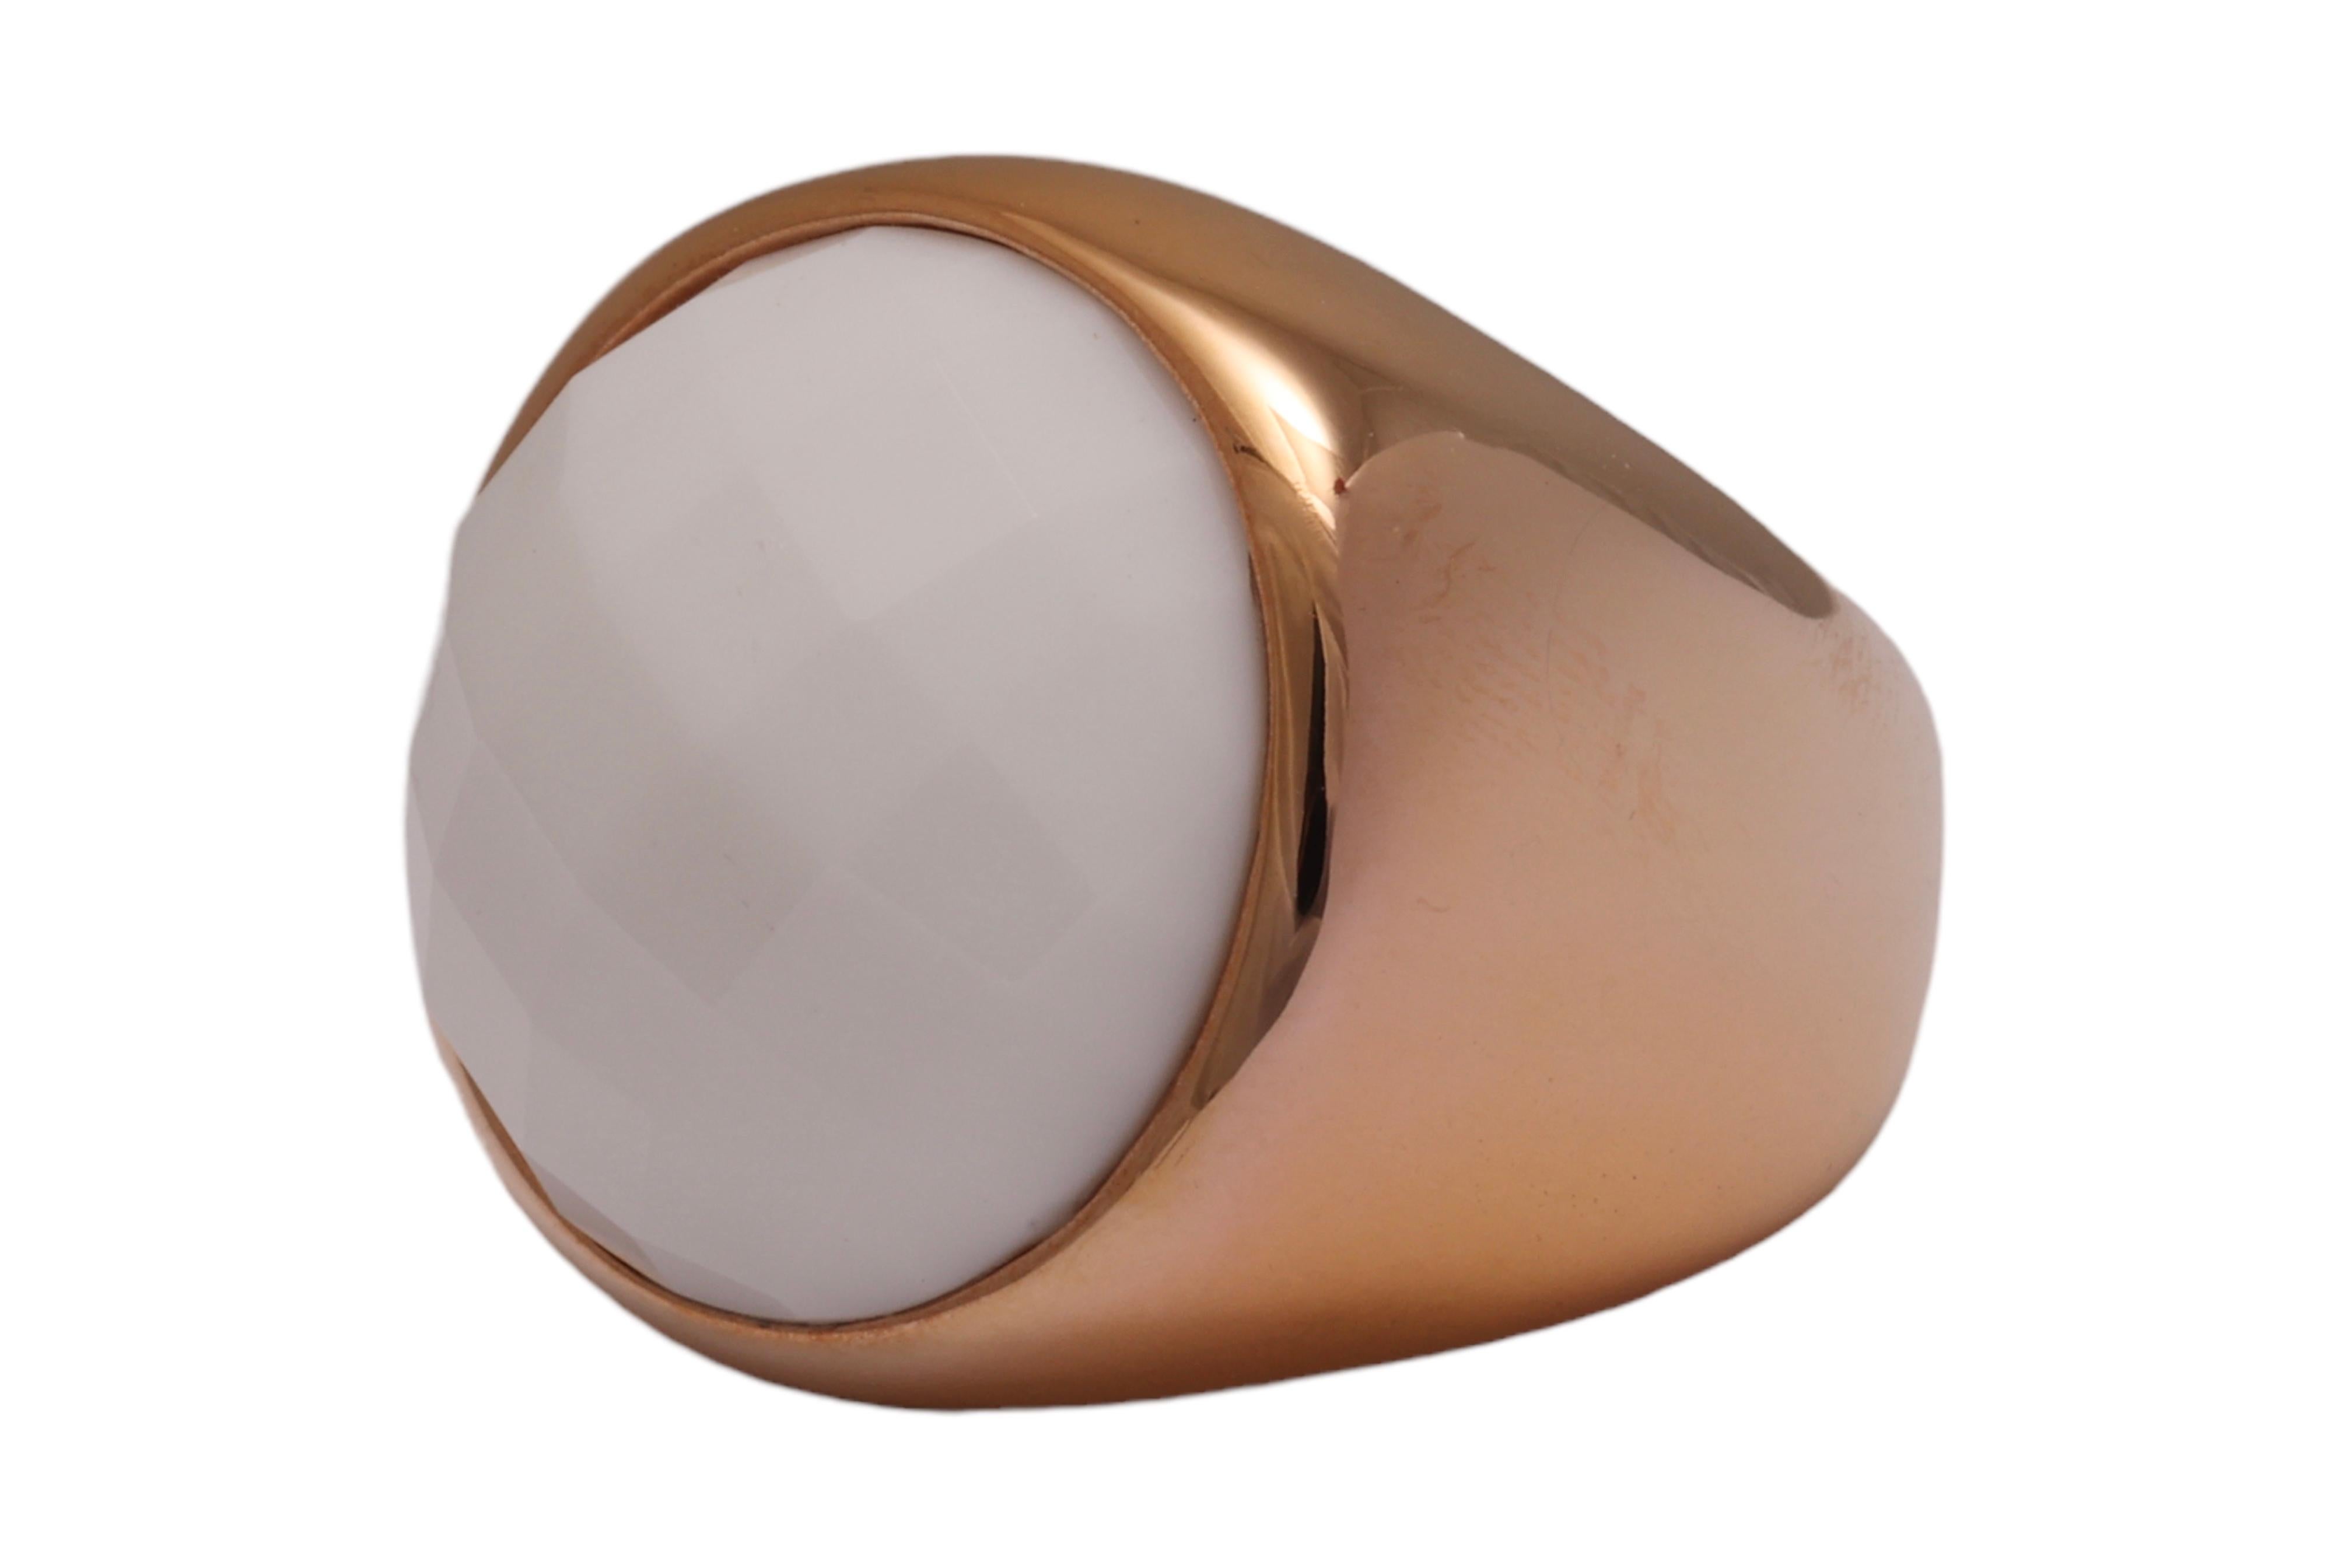 Gorgeous 18kt. Pink Gold Ring With Round Faceted White Onyx Stone 

Agate: White Round Faceted Agate stone, Measurements: diameter 17.7 mm

Material: 18 kt. Pink gold

Ring size: 54 / 7 US ( can be resized for free)

Total weight: 13.7 gram / 0.485